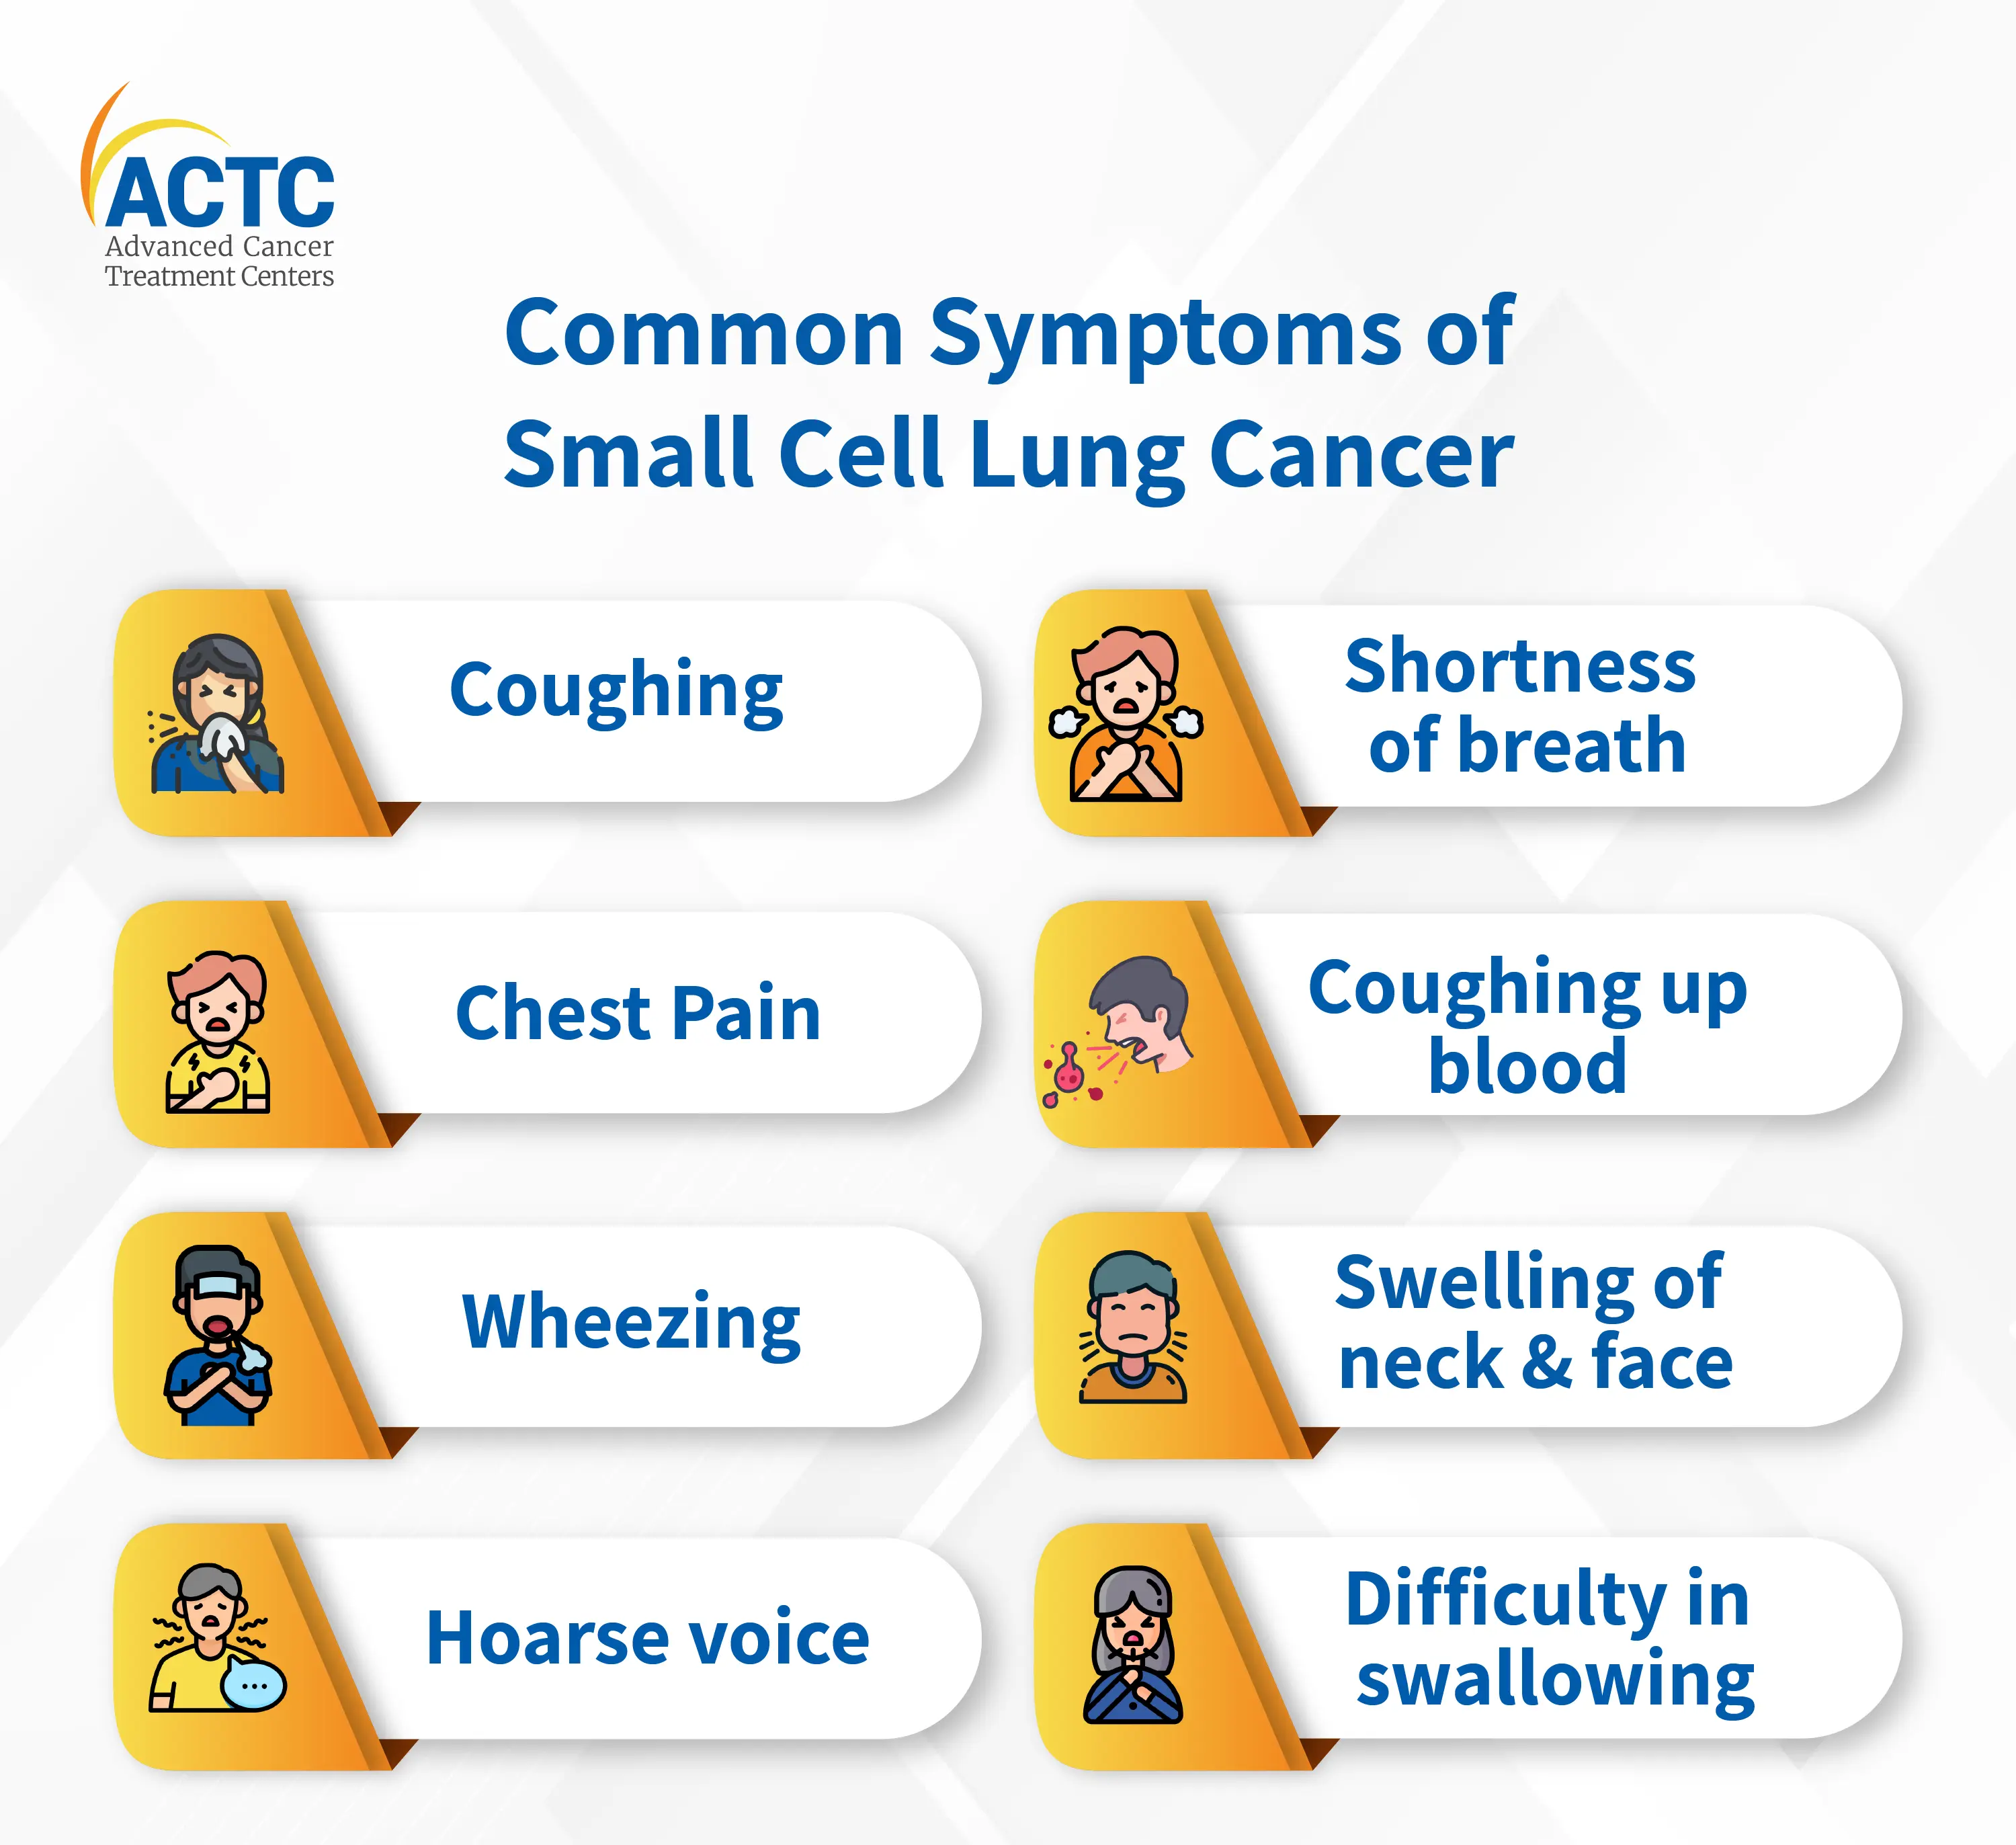 Common Symptoms of Small Cell Lung Cancer